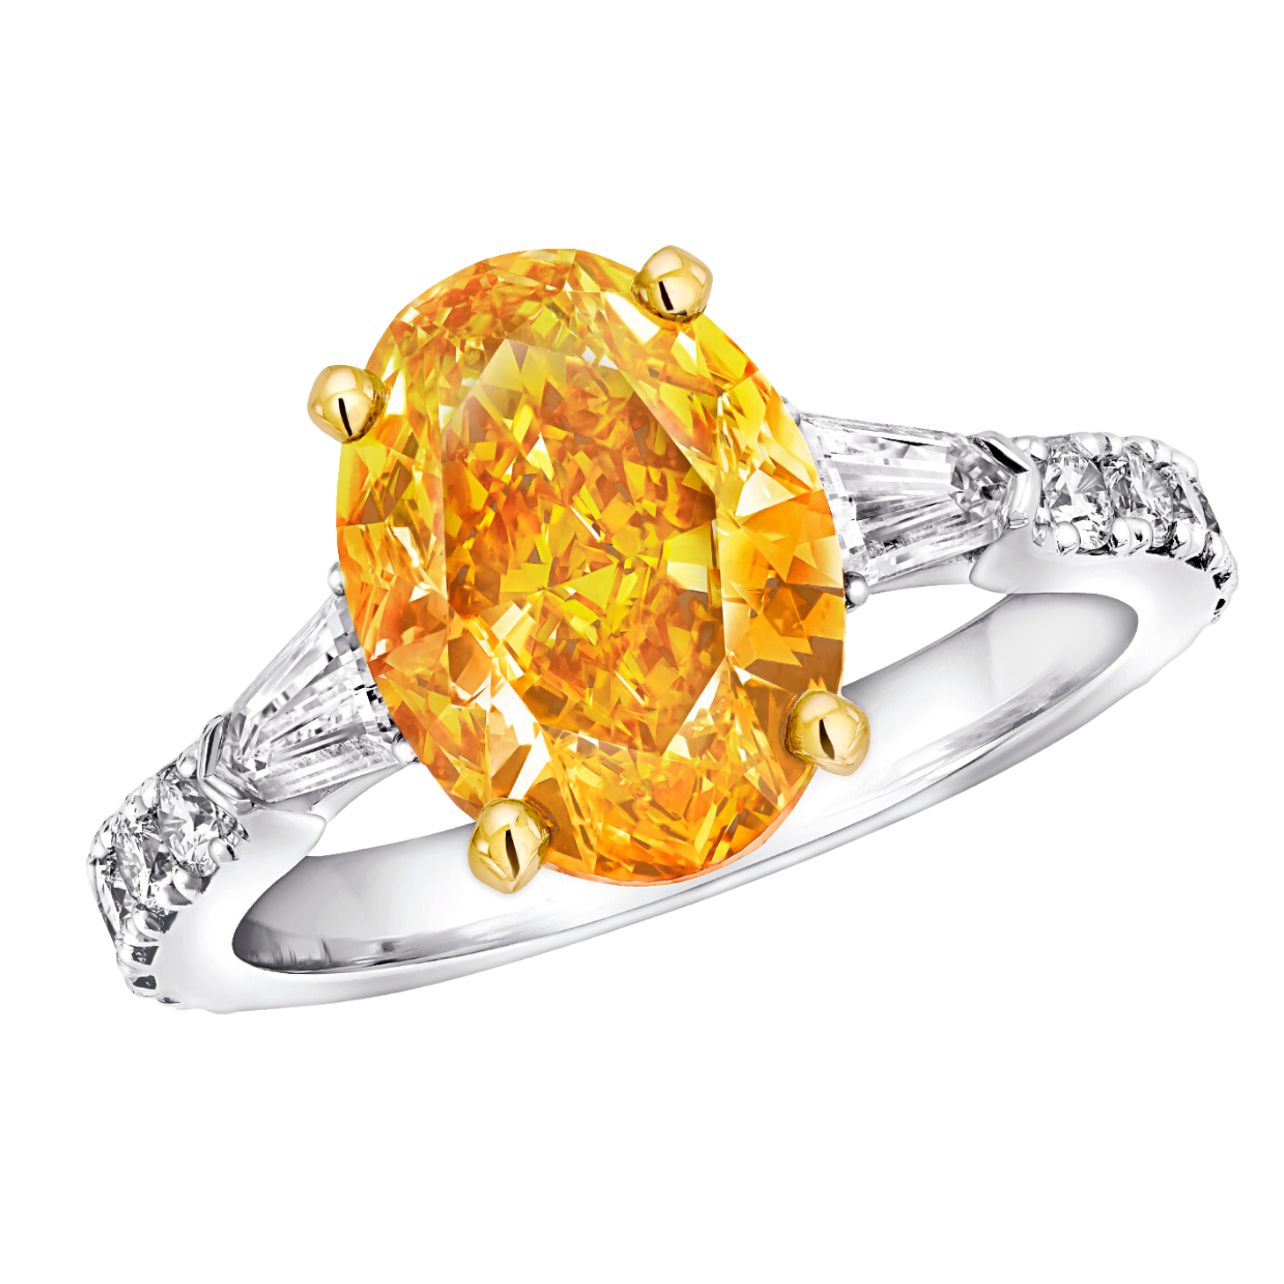 Promise ring featuring a yellow diamond with white diamond shoulders set in platinum and yellow gold.